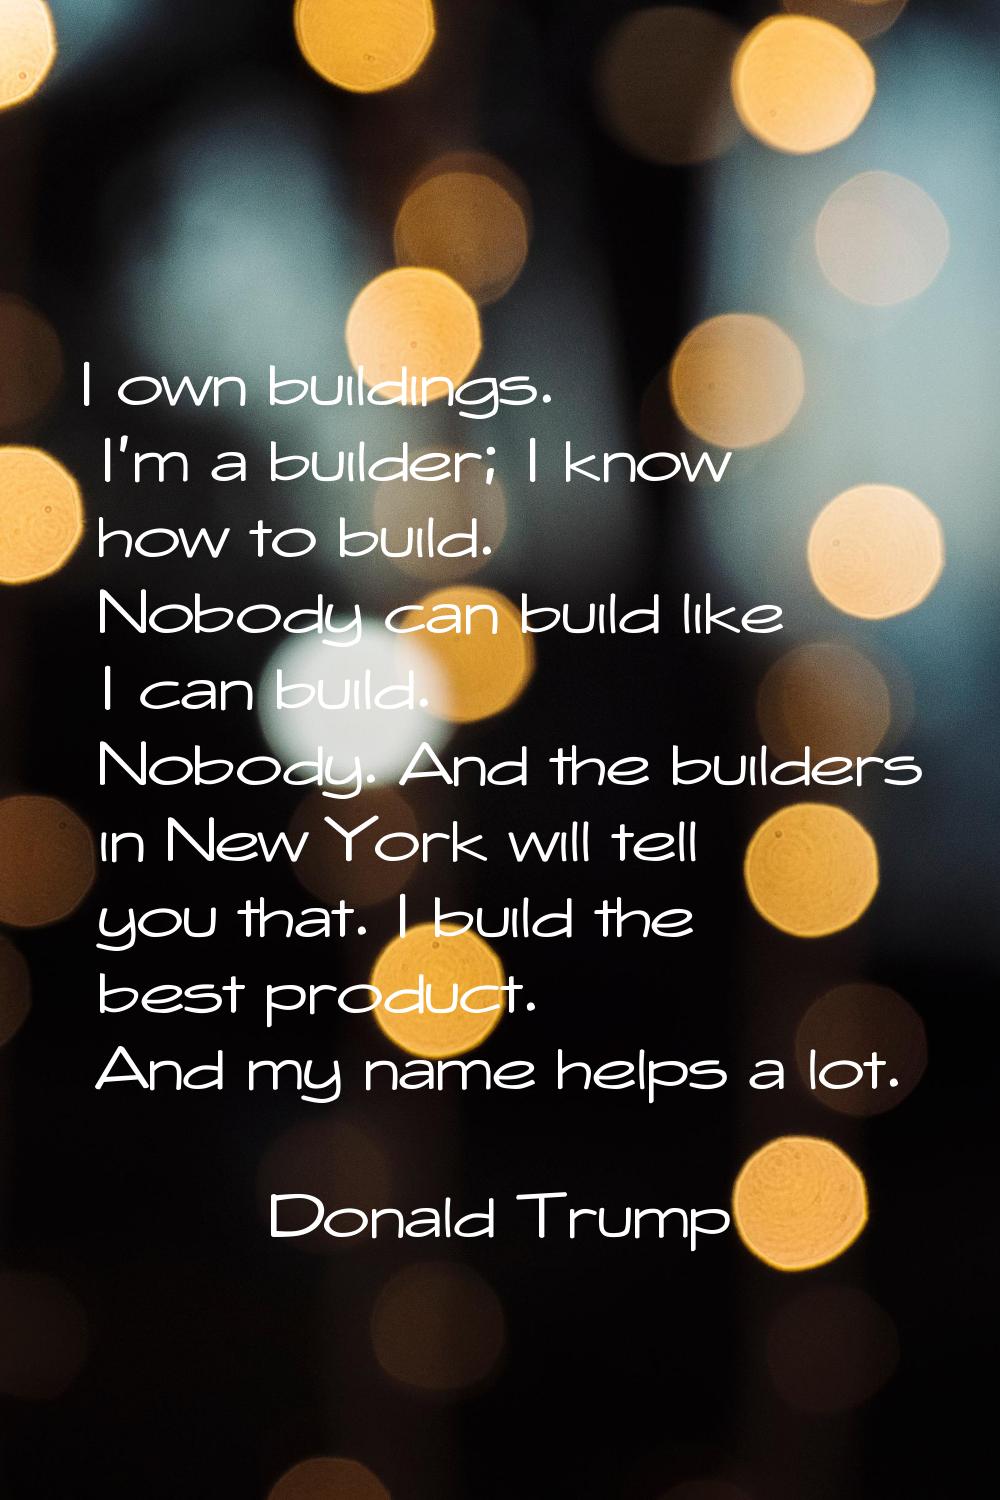 I own buildings. I'm a builder; I know how to build. Nobody can build like I can build. Nobody. And